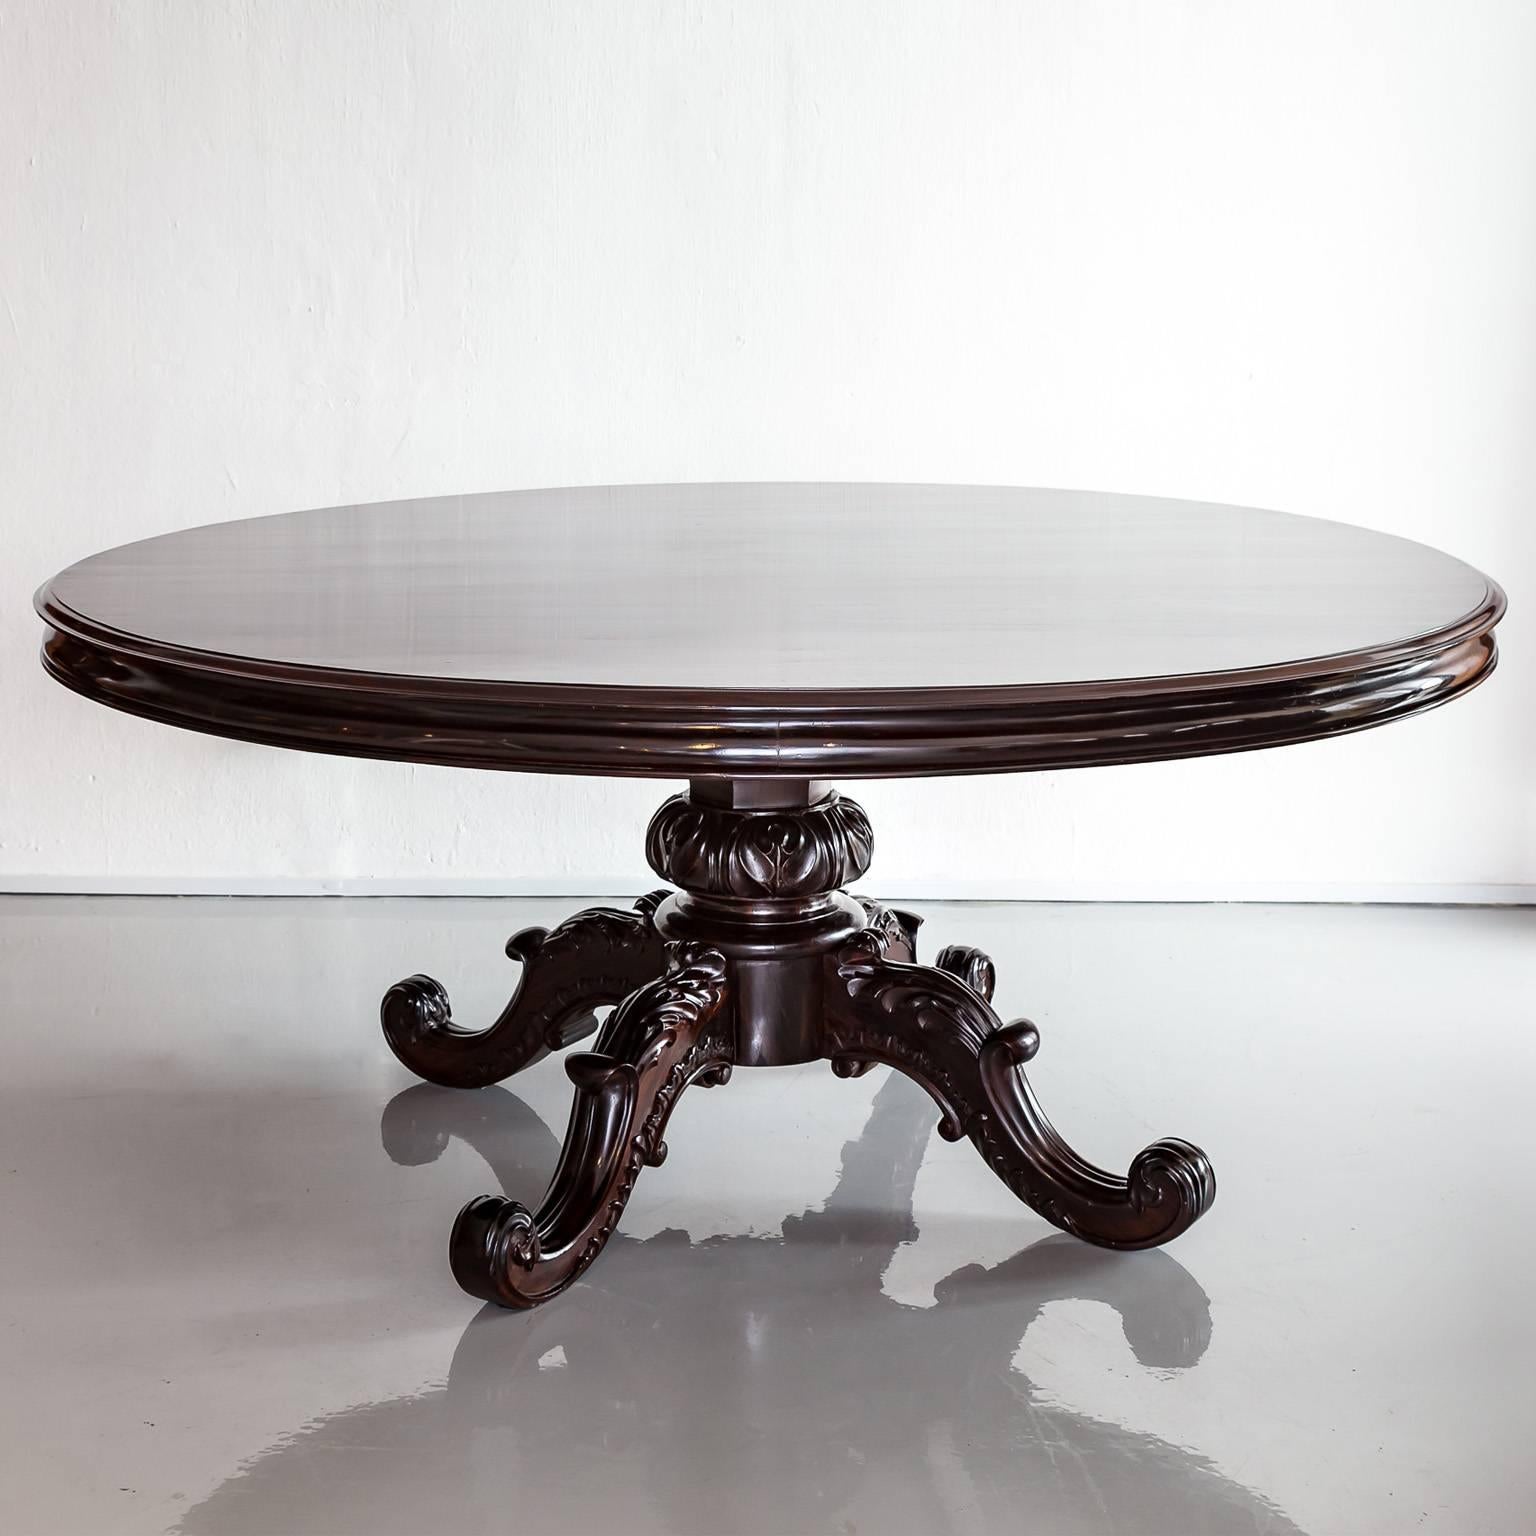 A beautiful, large British colonial round dining table made of rosewood. The circular top is superb with moulded edges above and below the apron. 
The solid base has a carved central pillar on a round platform which rests on four S-scrolled carved